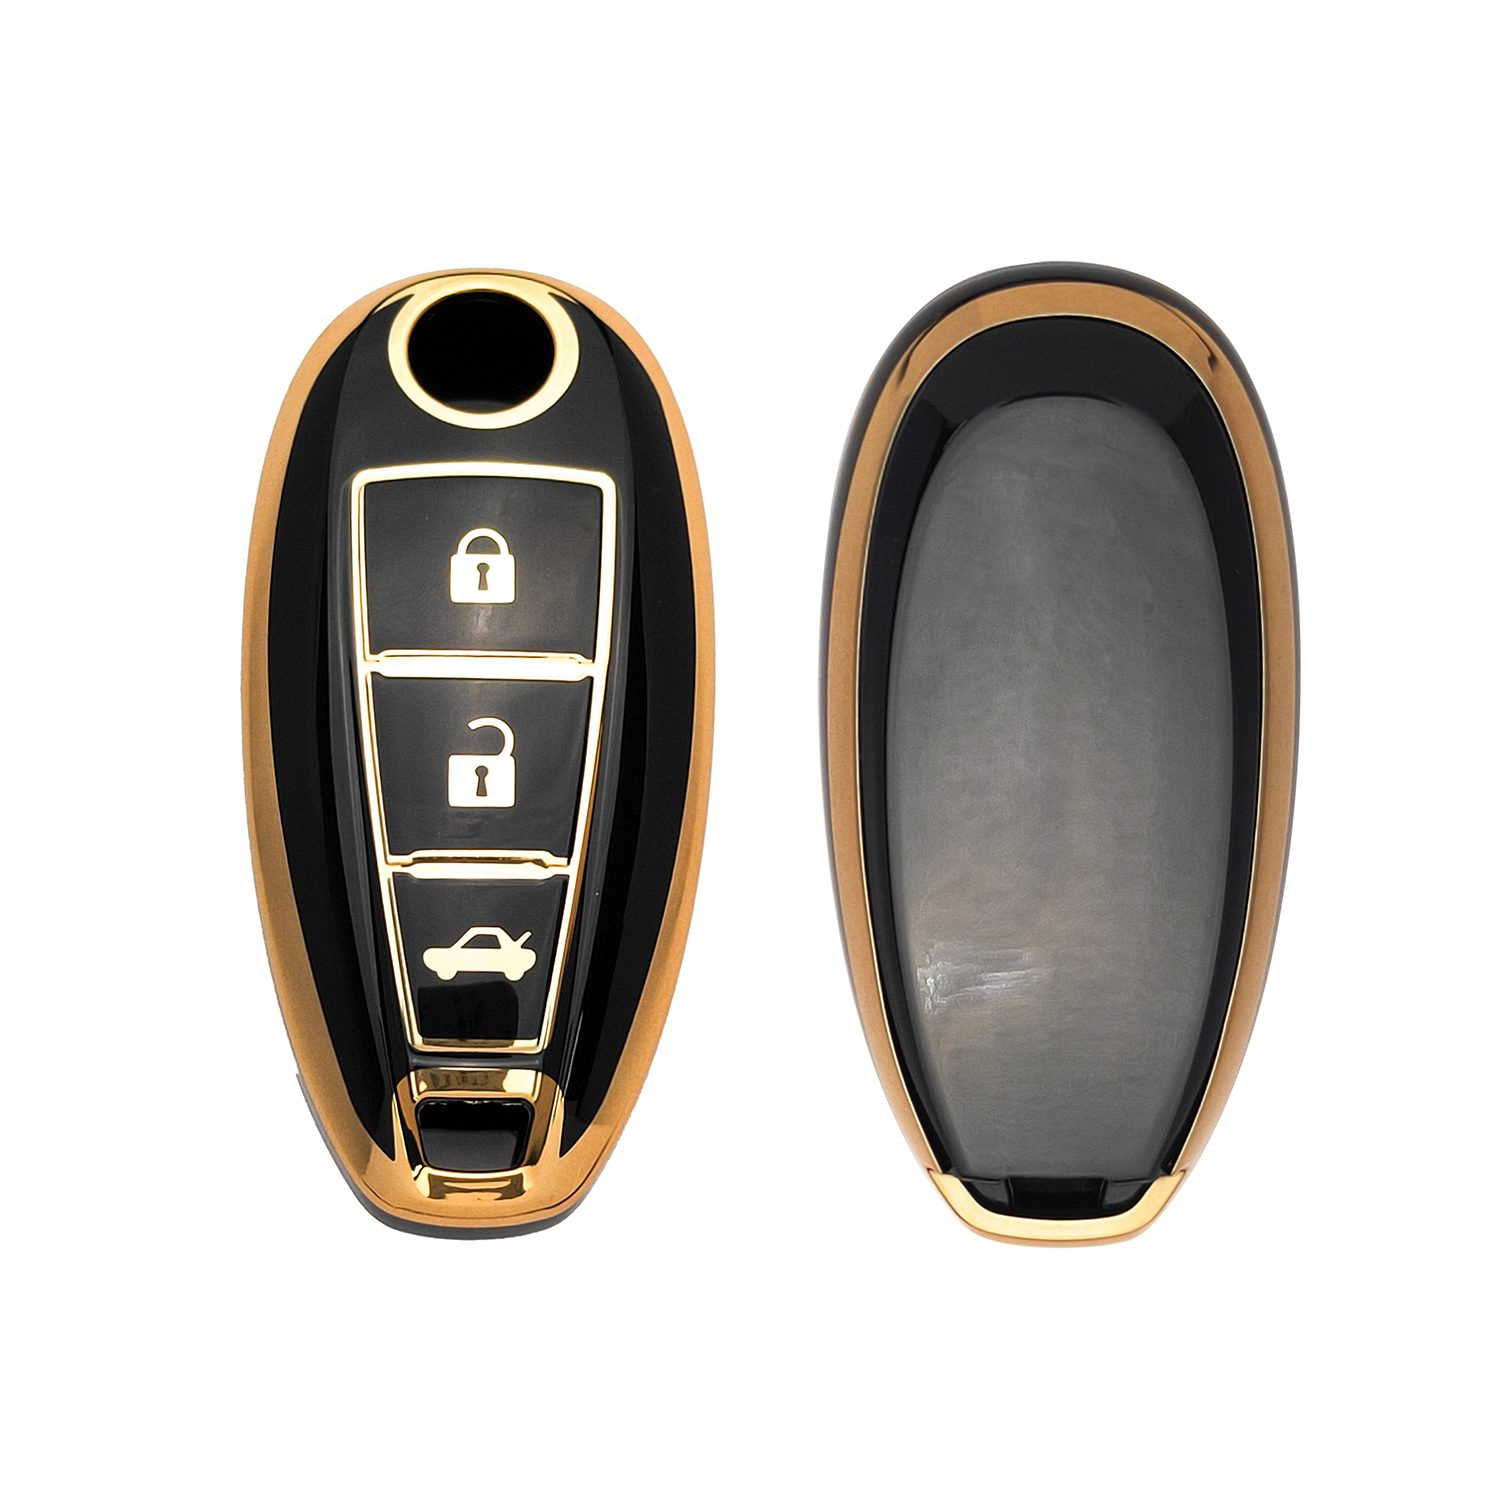 Acto TPU Gold Series Car Key Cover With Diamond Key Ring For Suzuki S-cross